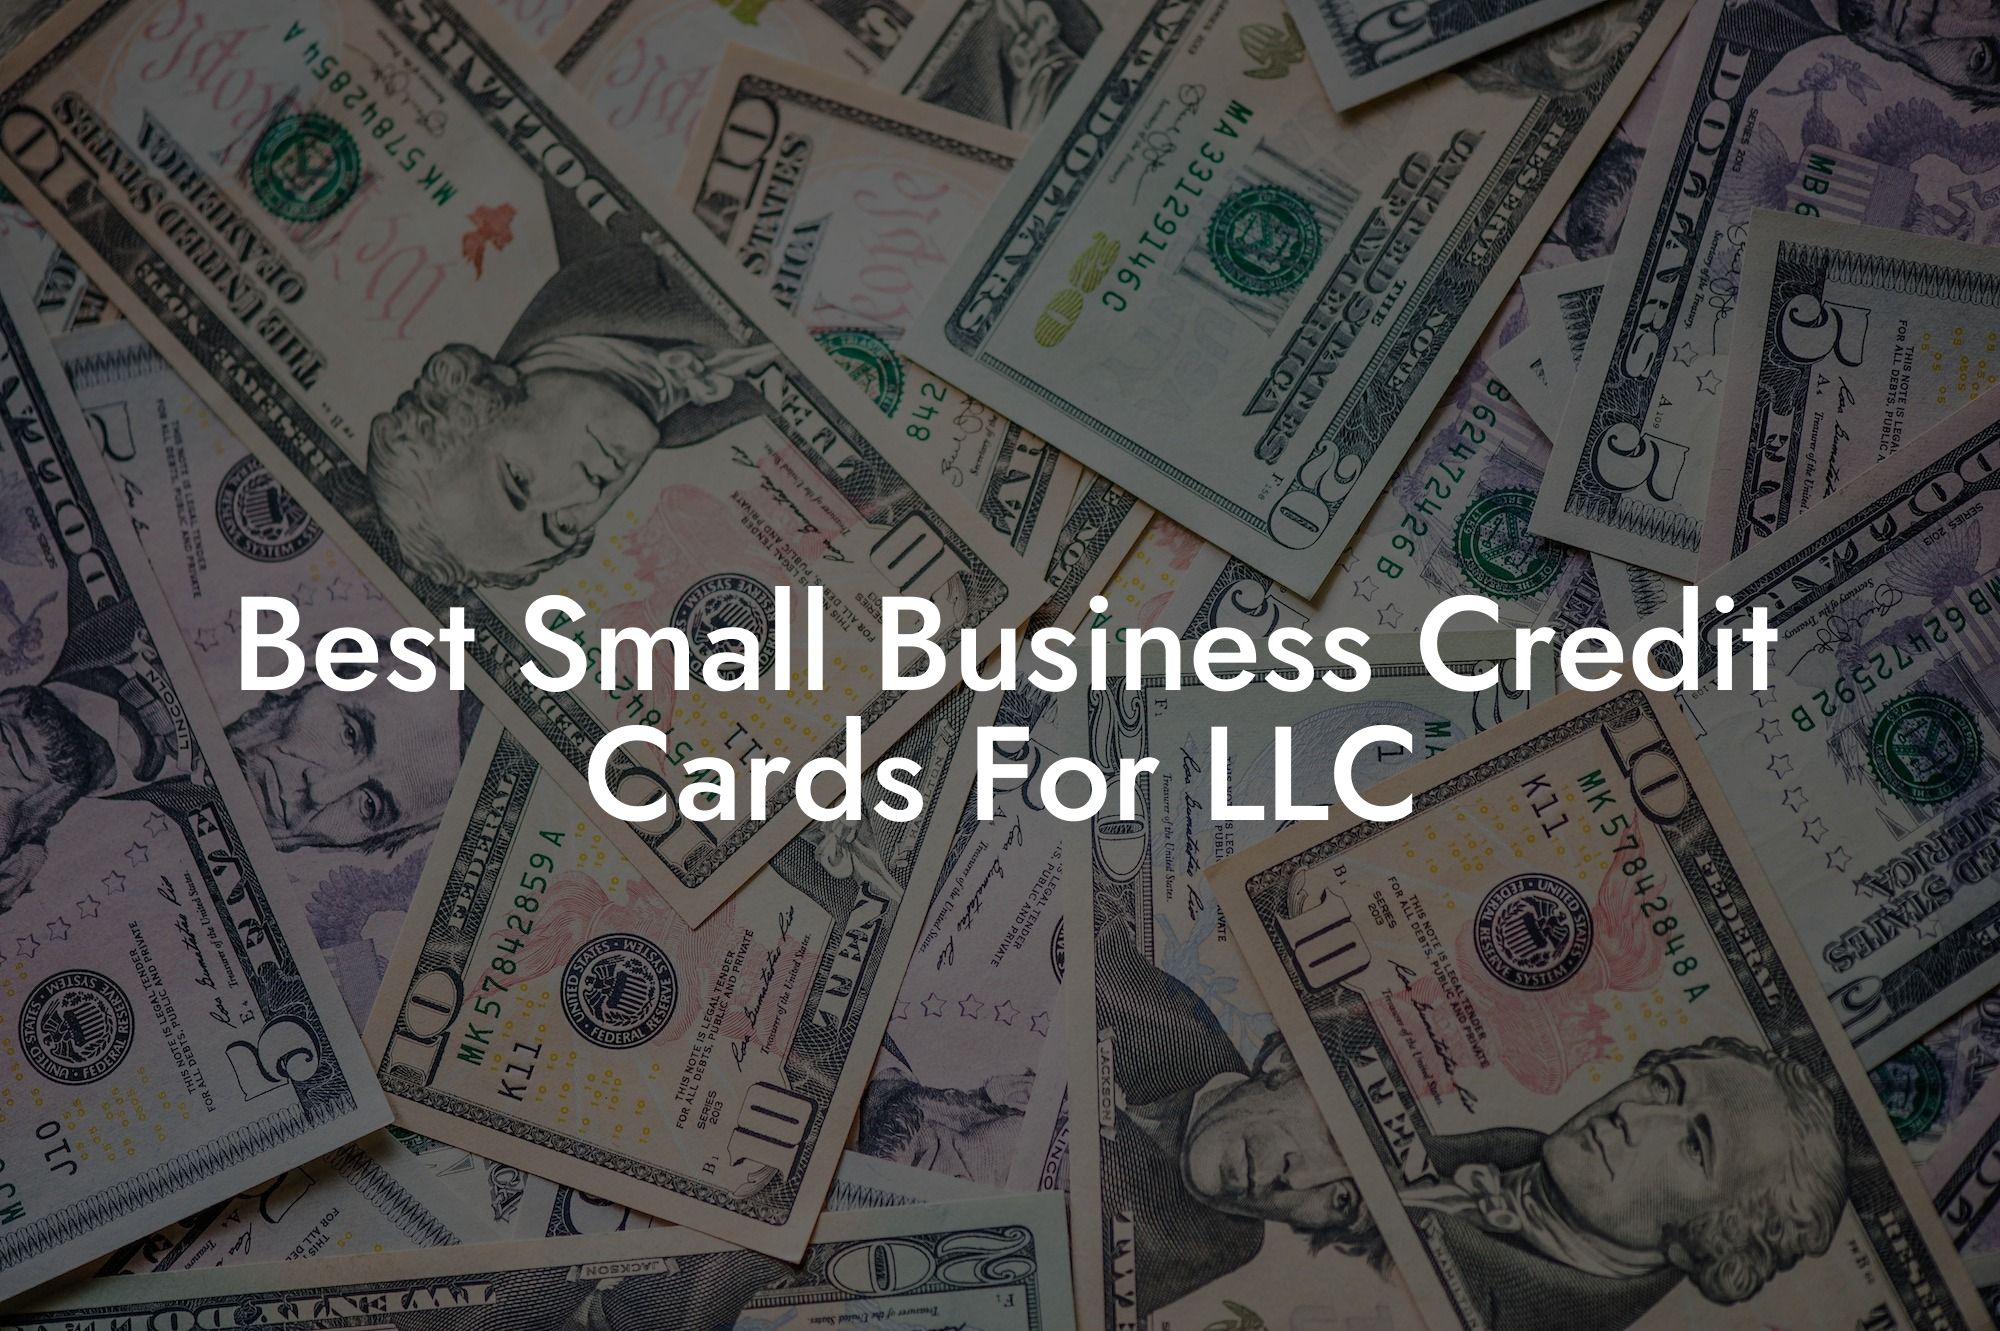 Best Small Business Credit Cards For LLC